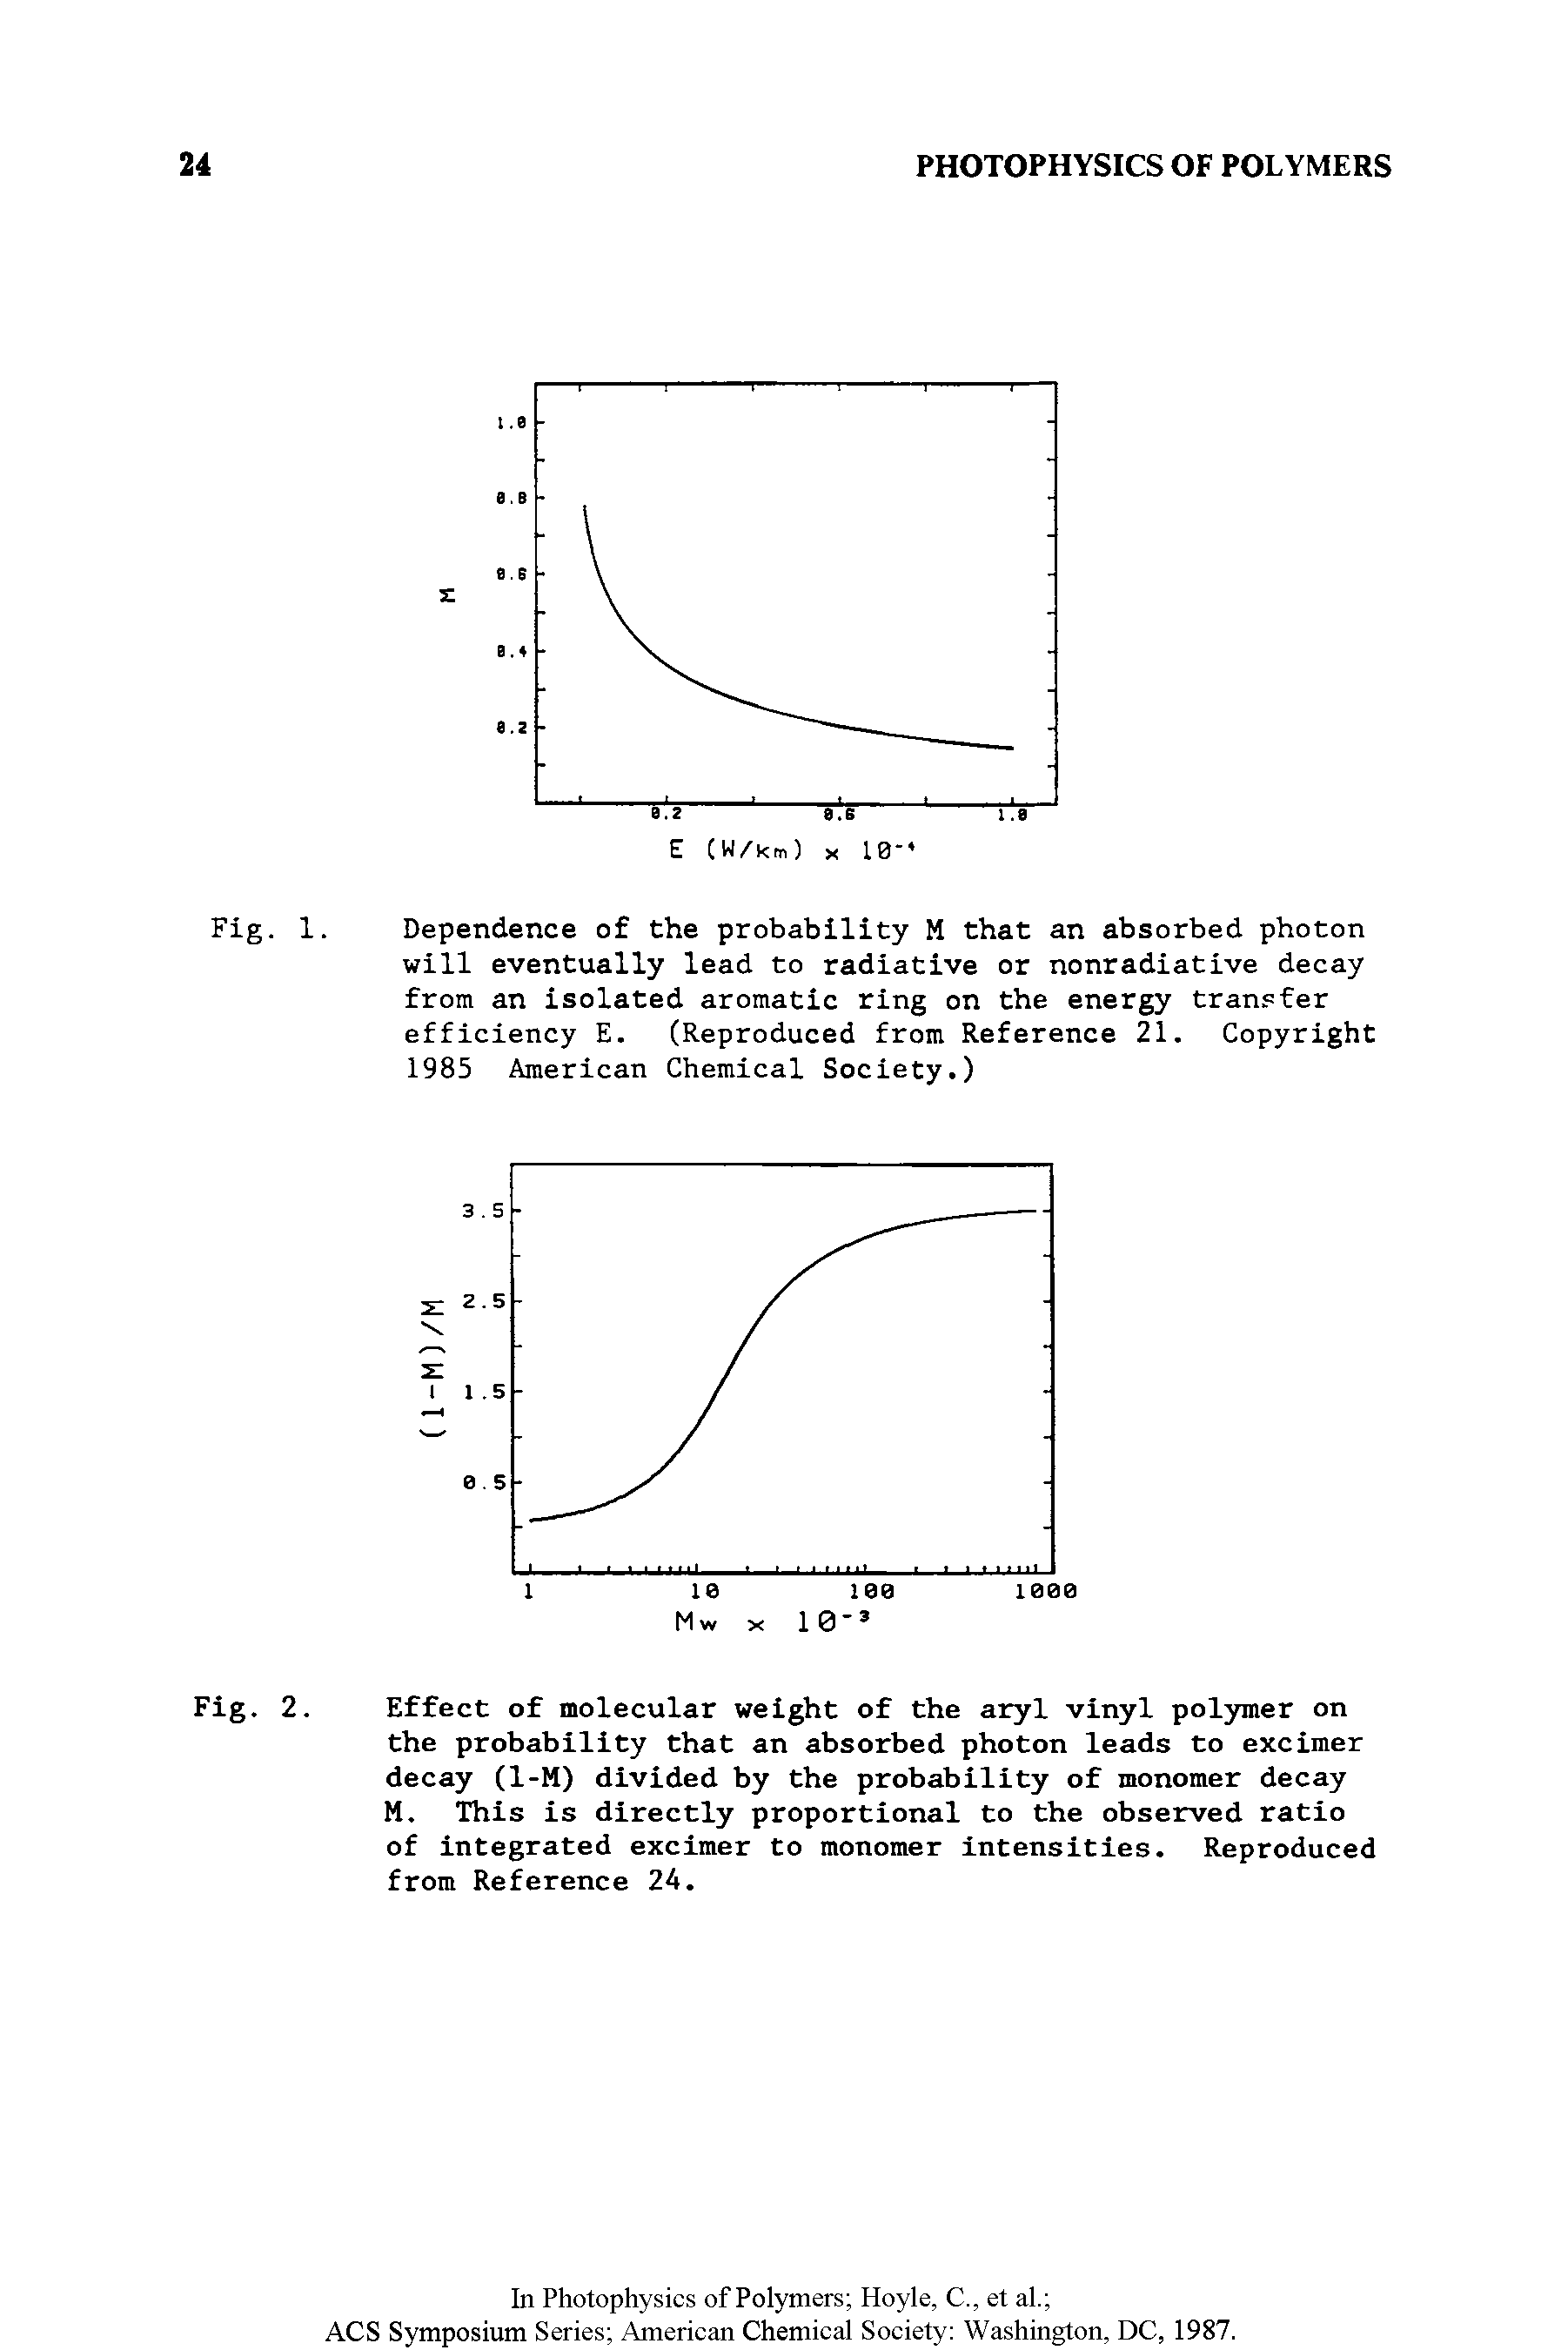 Fig. 2. Effect of molecular weight of the aryl vinyl polymer on the probability that an absorbed photon leads to excimer decay (1-M) divided by the probability of monomer decay M, This is directly proportional to the observed ratio of integrated excimer to monomer intensities. Reproduced from Reference 2A.